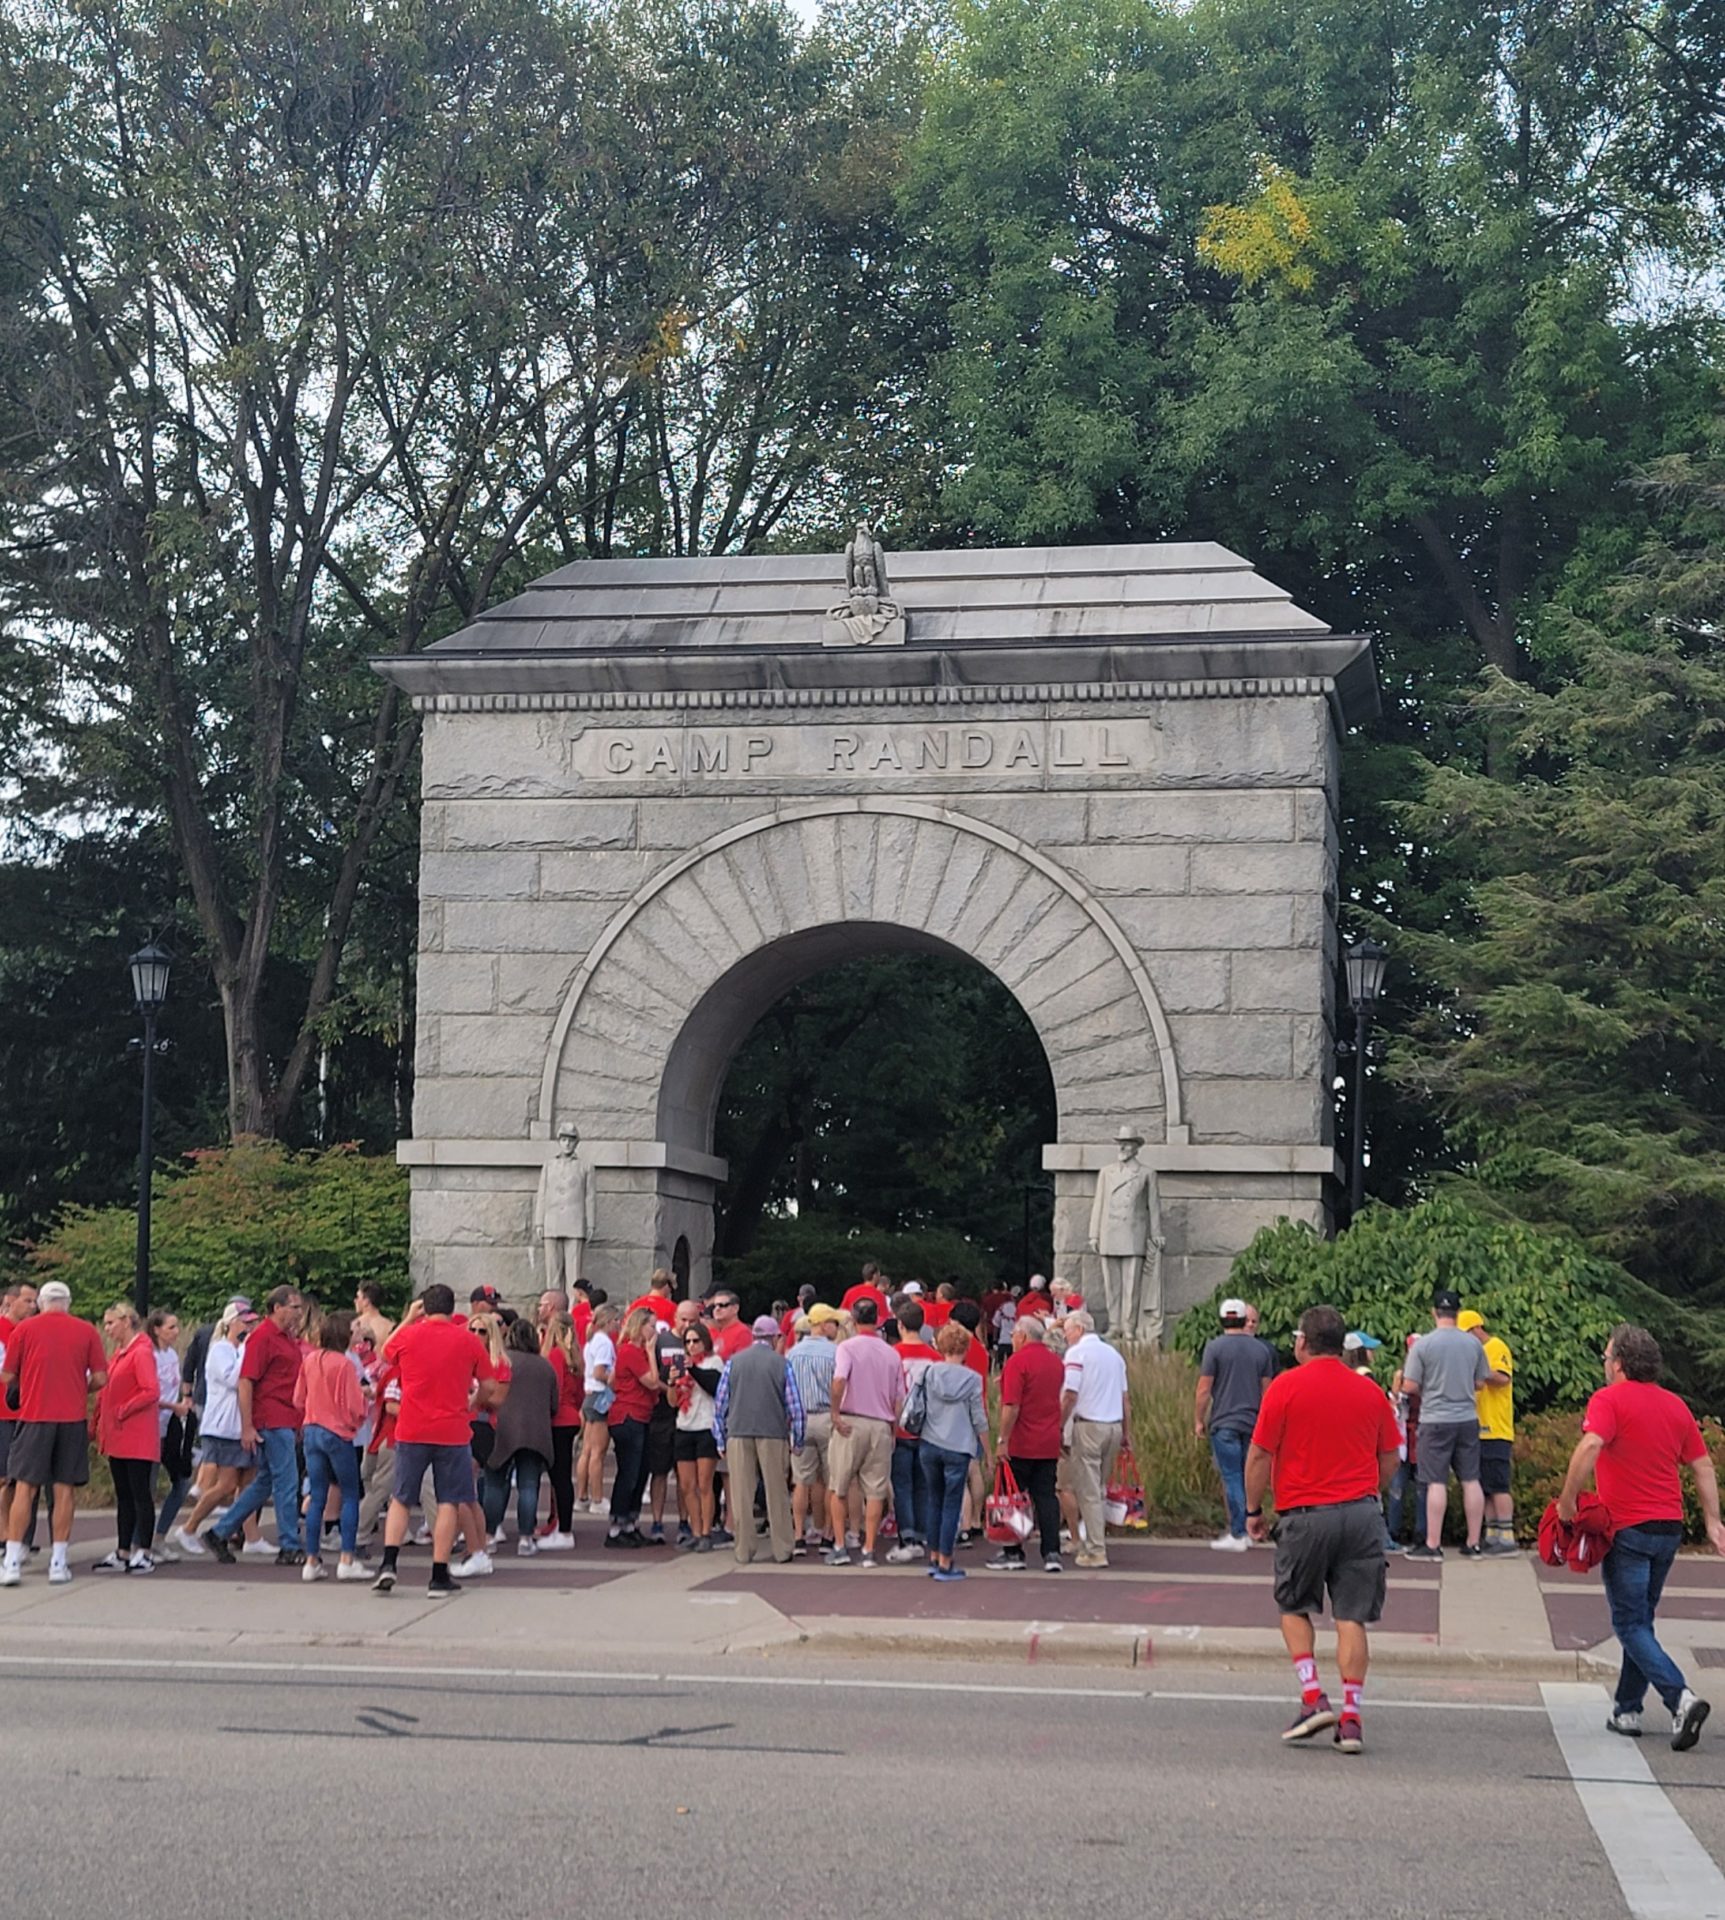 a group of people standing in front of a stone archway with Camp Randall Stadium in the background